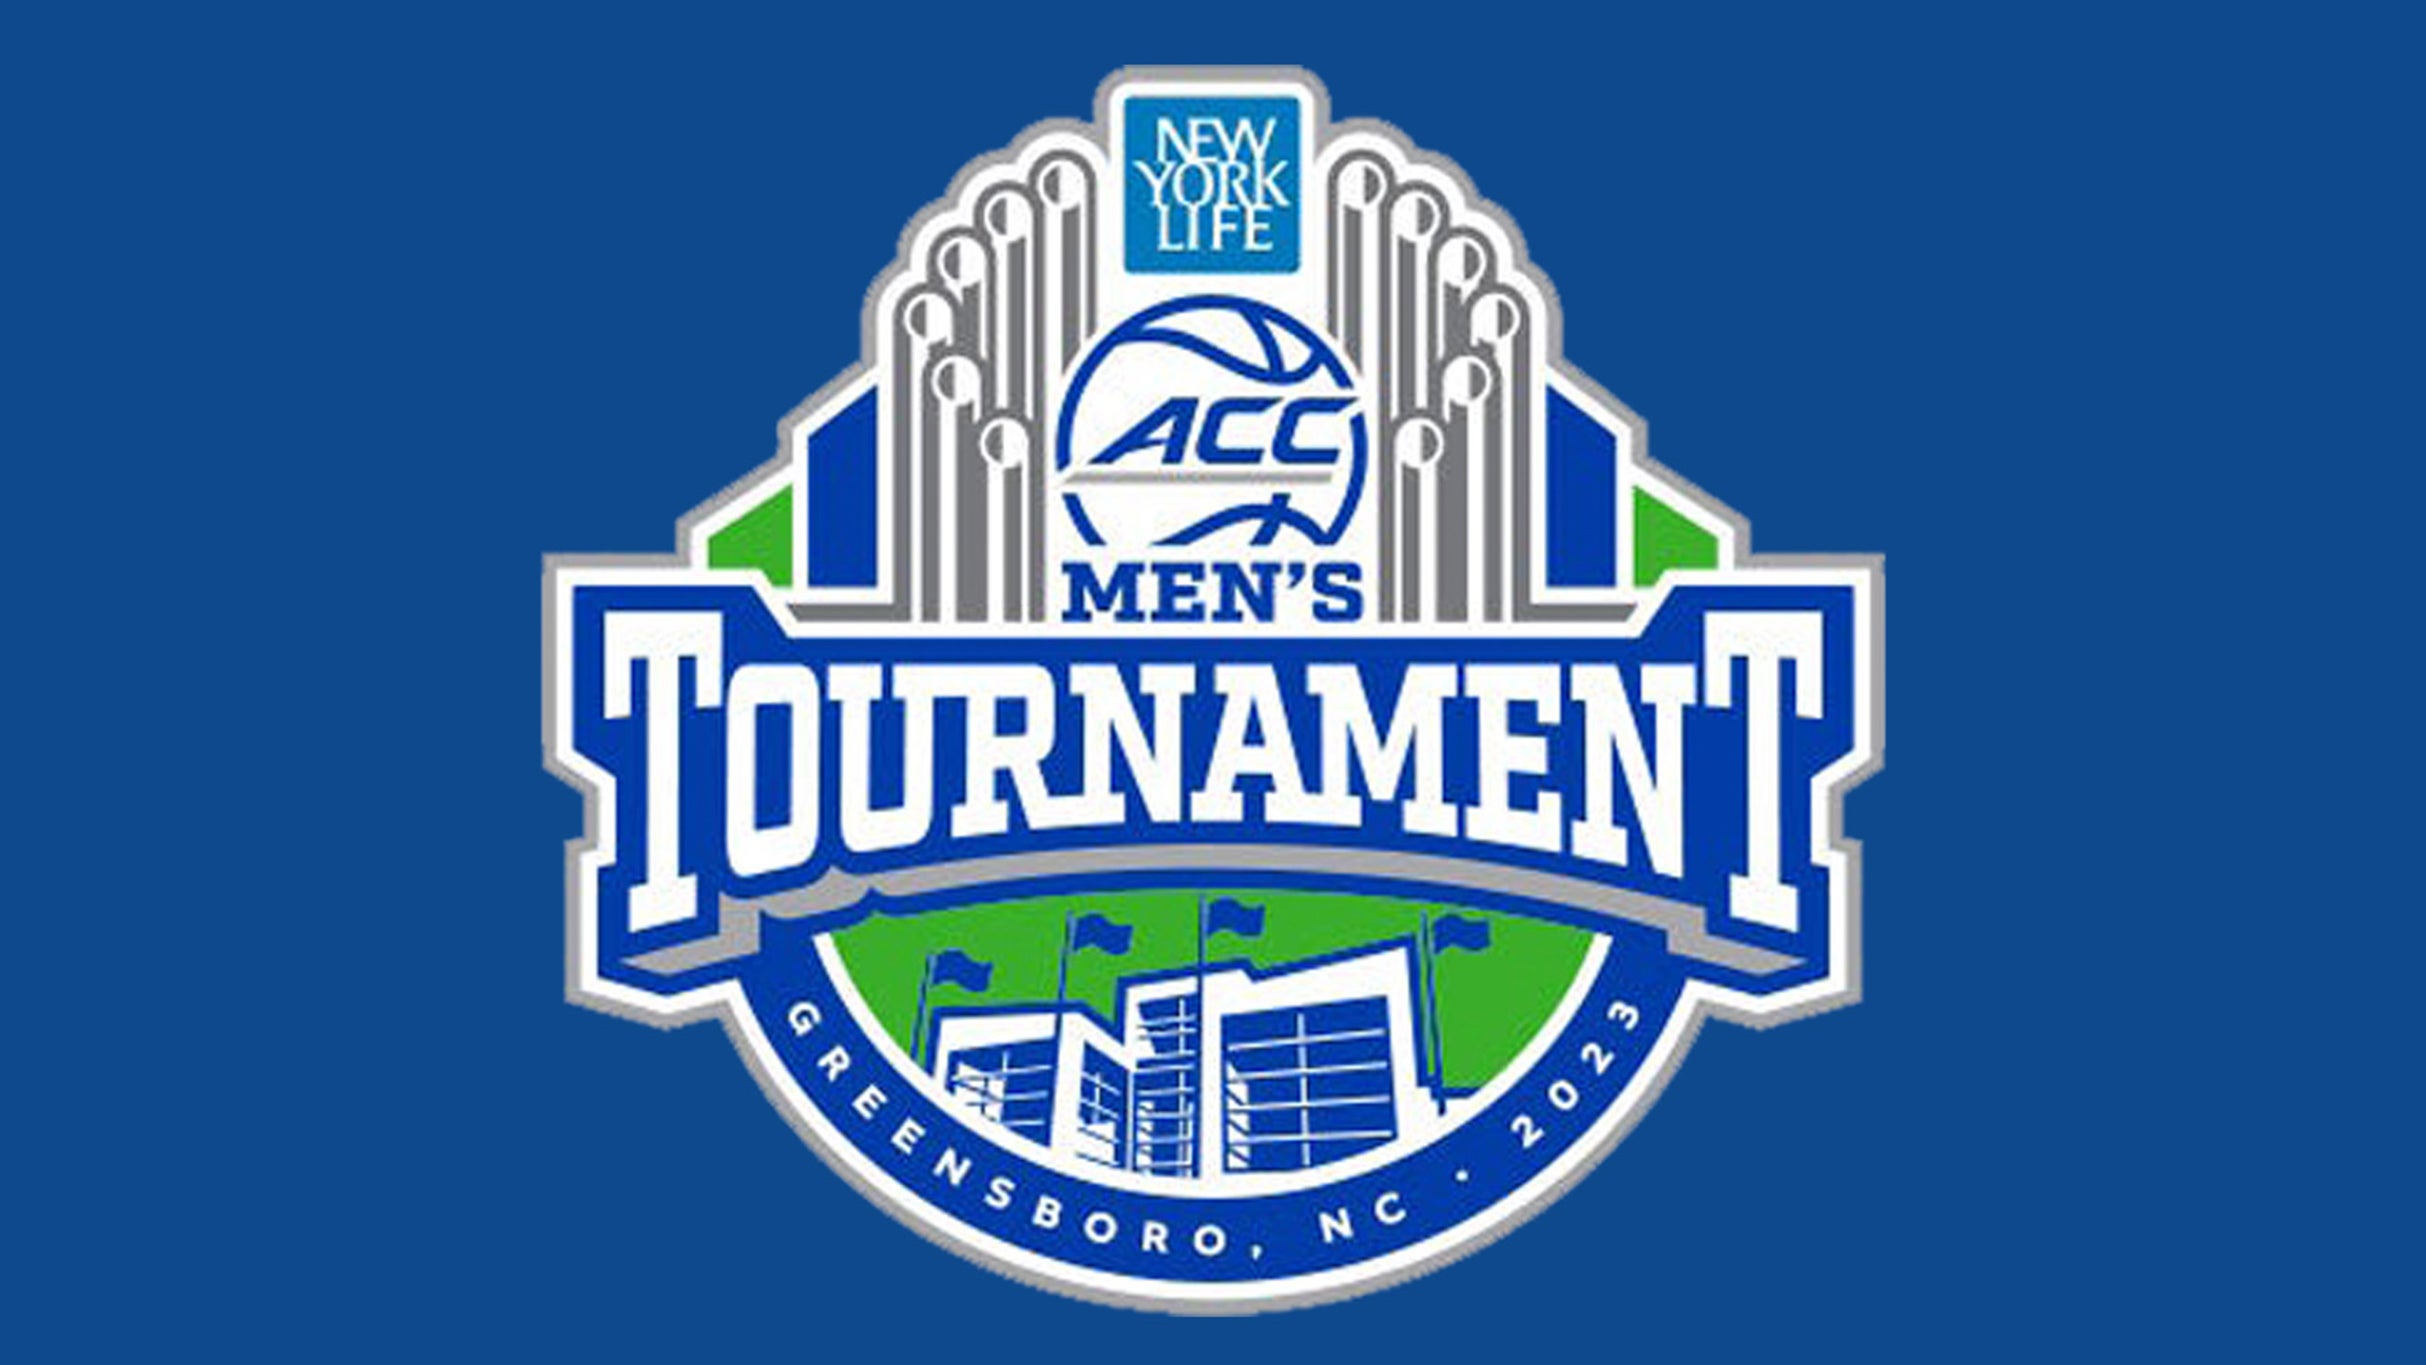 2023 New York Life ACC Men's Basketball Tournament Finals in Greensboro promo photo for Resale Onsale presale offer code